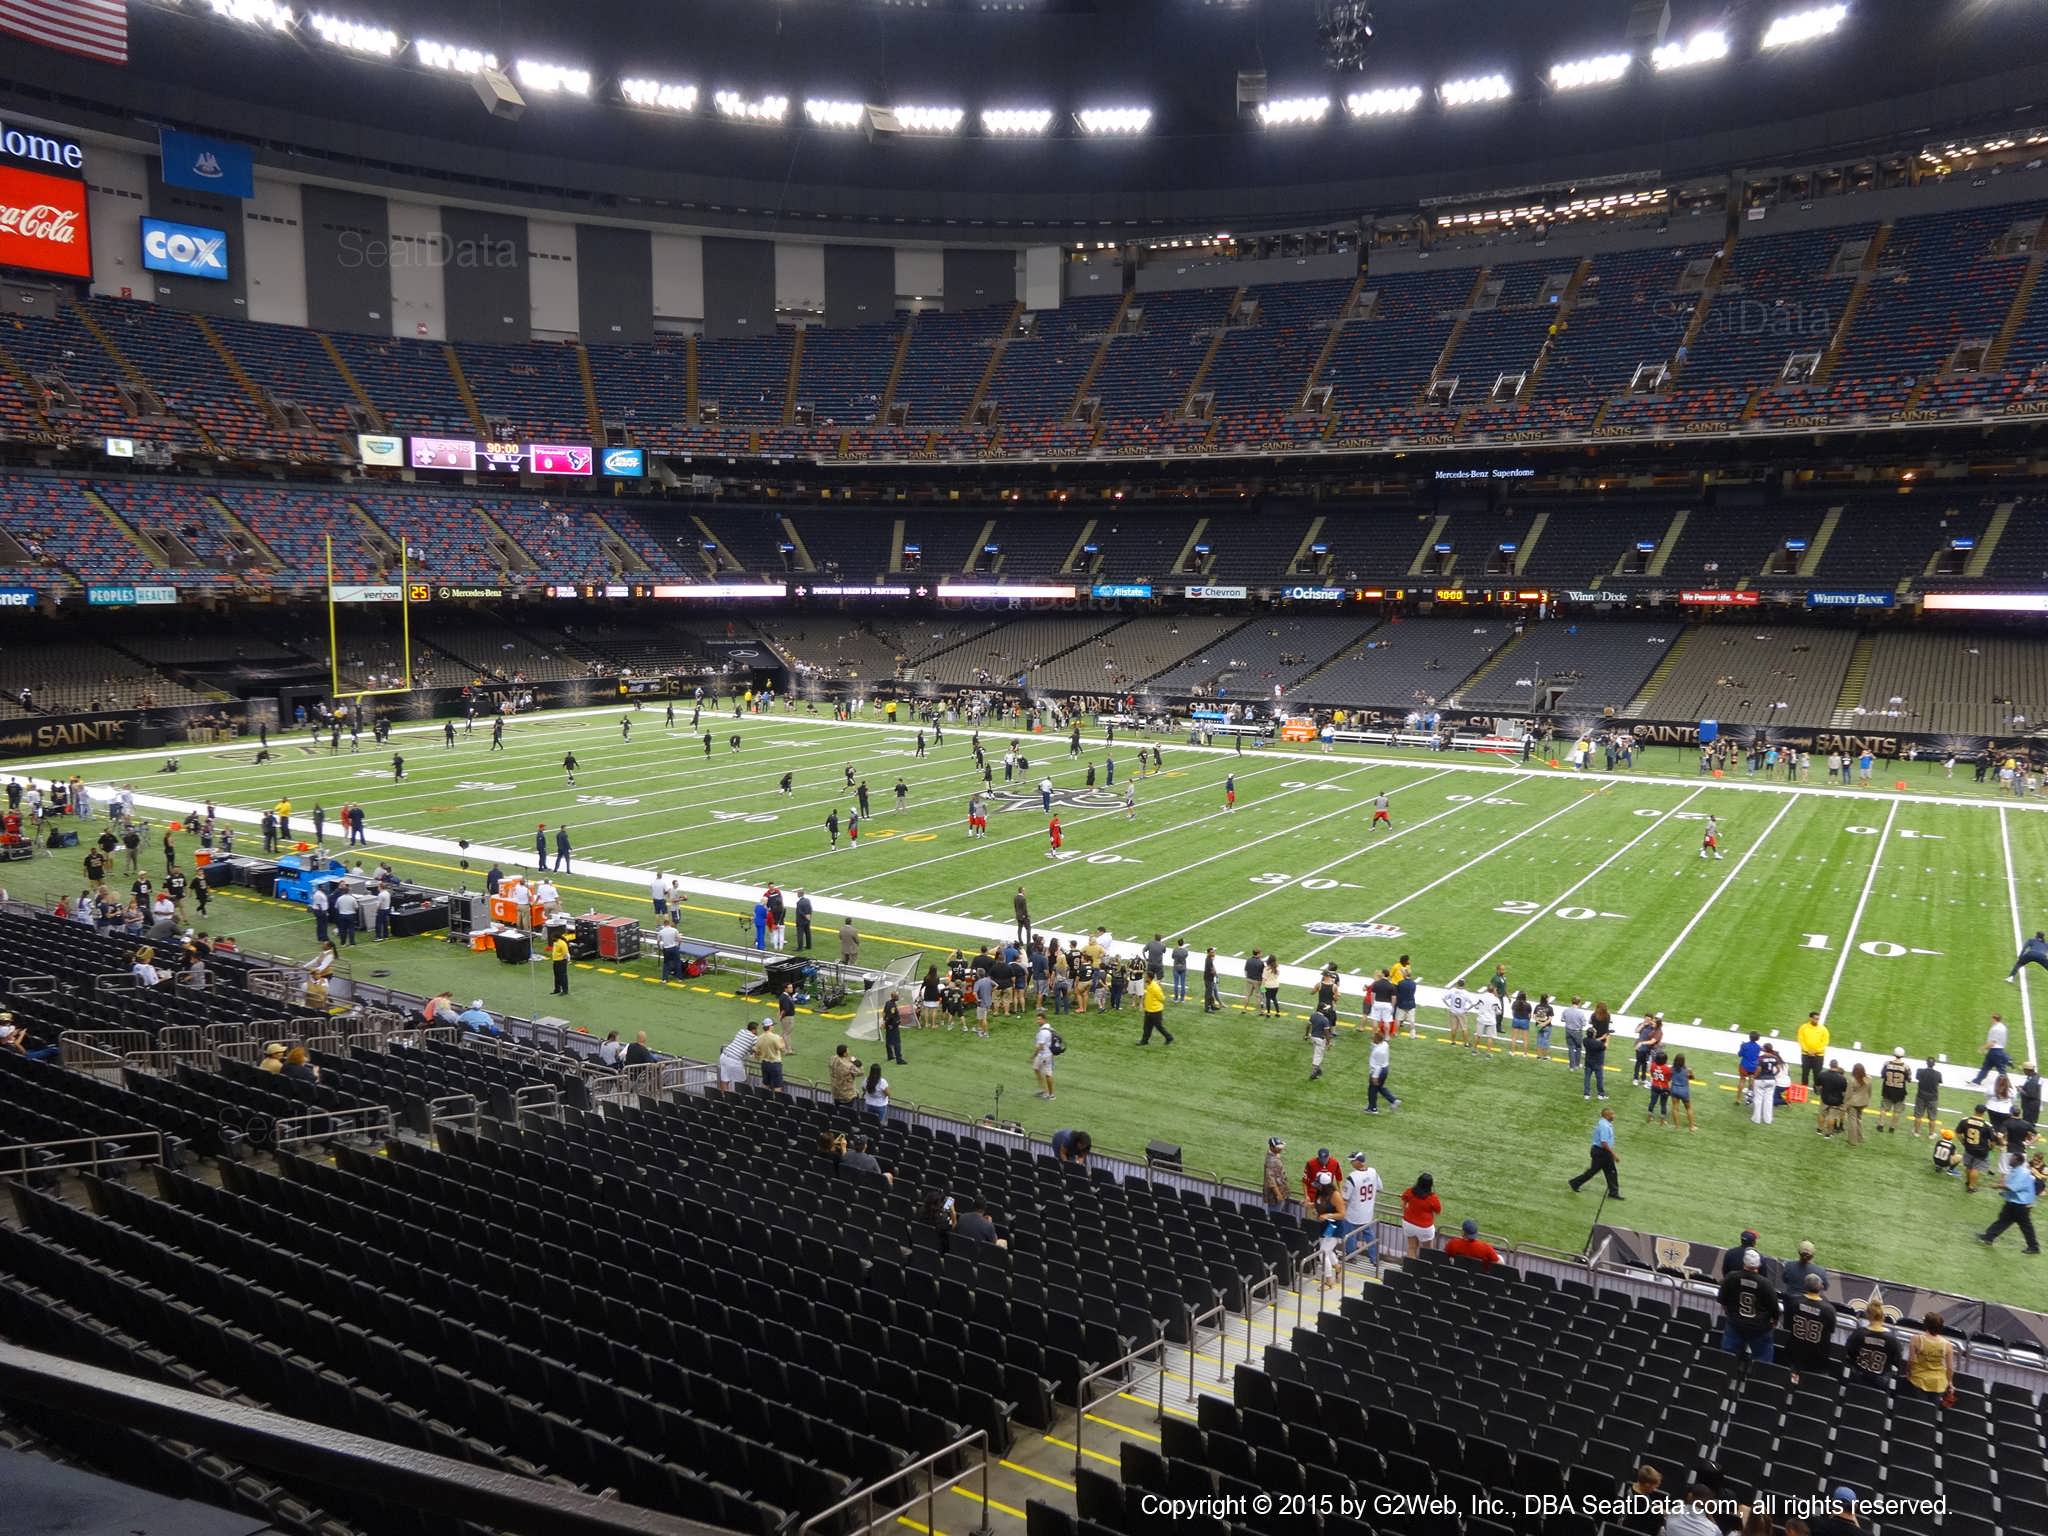 Seat view from section 215 at the Mercedes-Benz Superdome, home of the New Orleans Saints